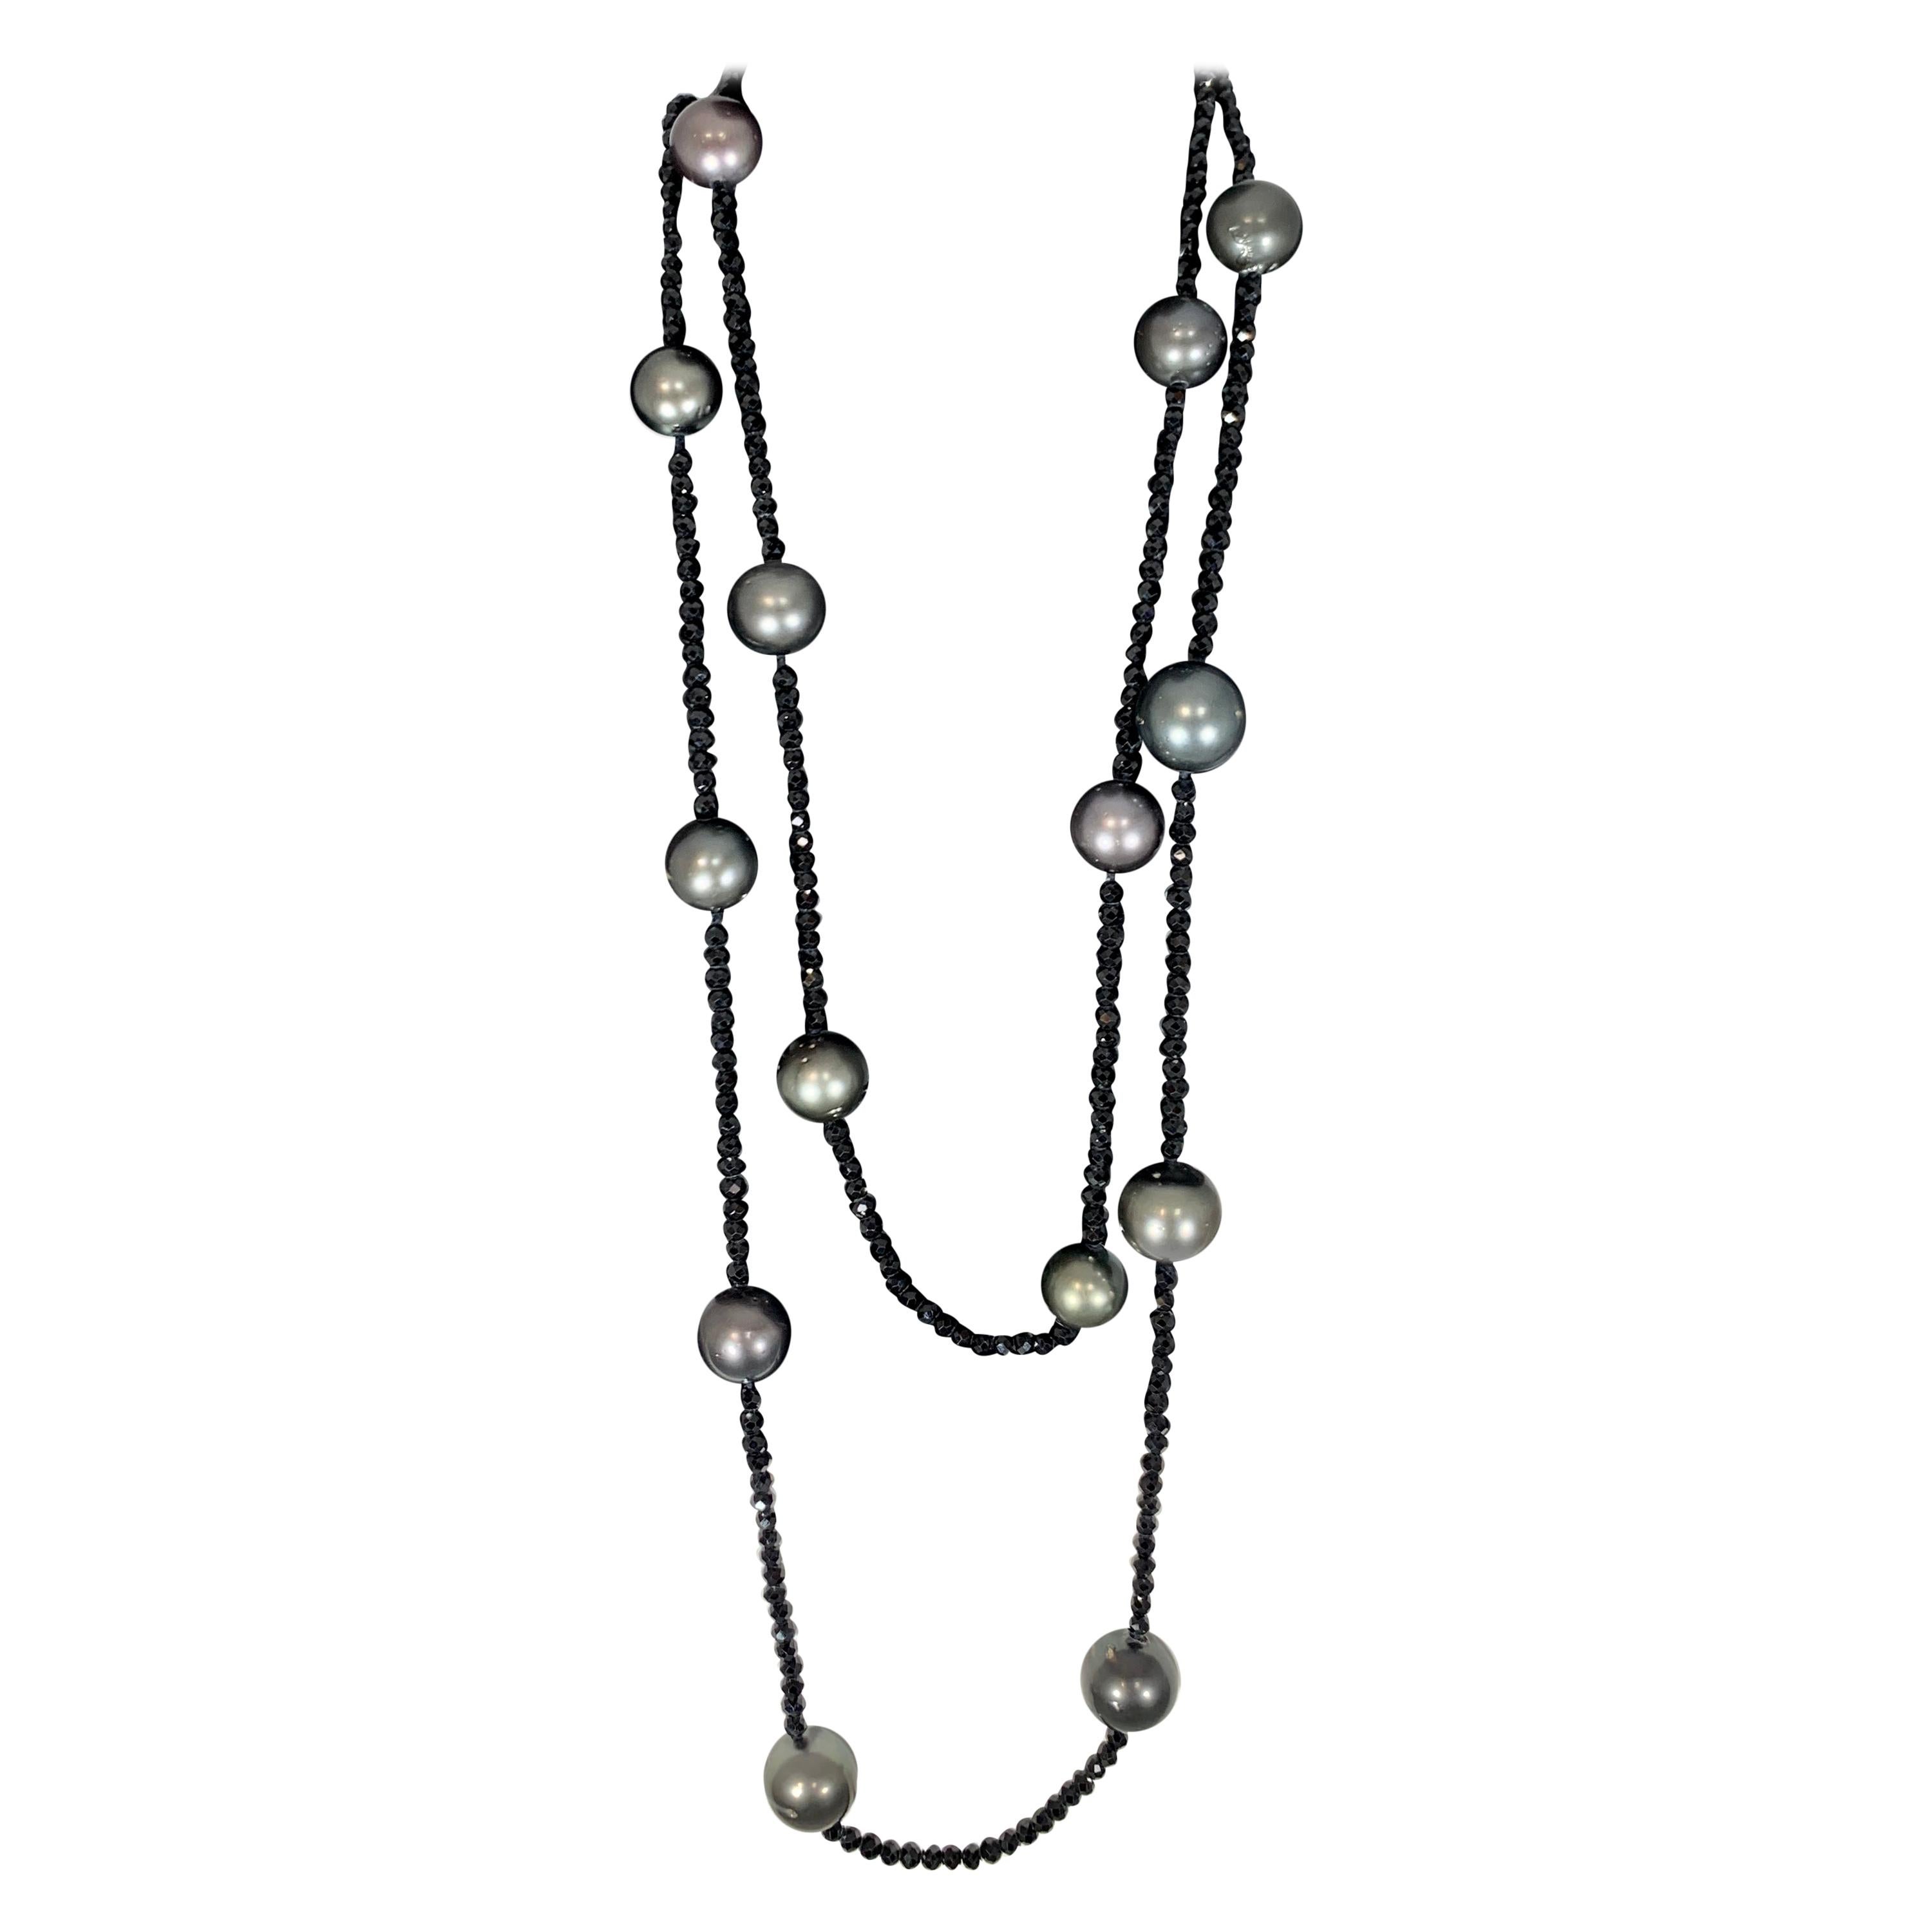 Black Tahitian Pearl Single Strand Necklace with Black Spinel, Opera Length 46"